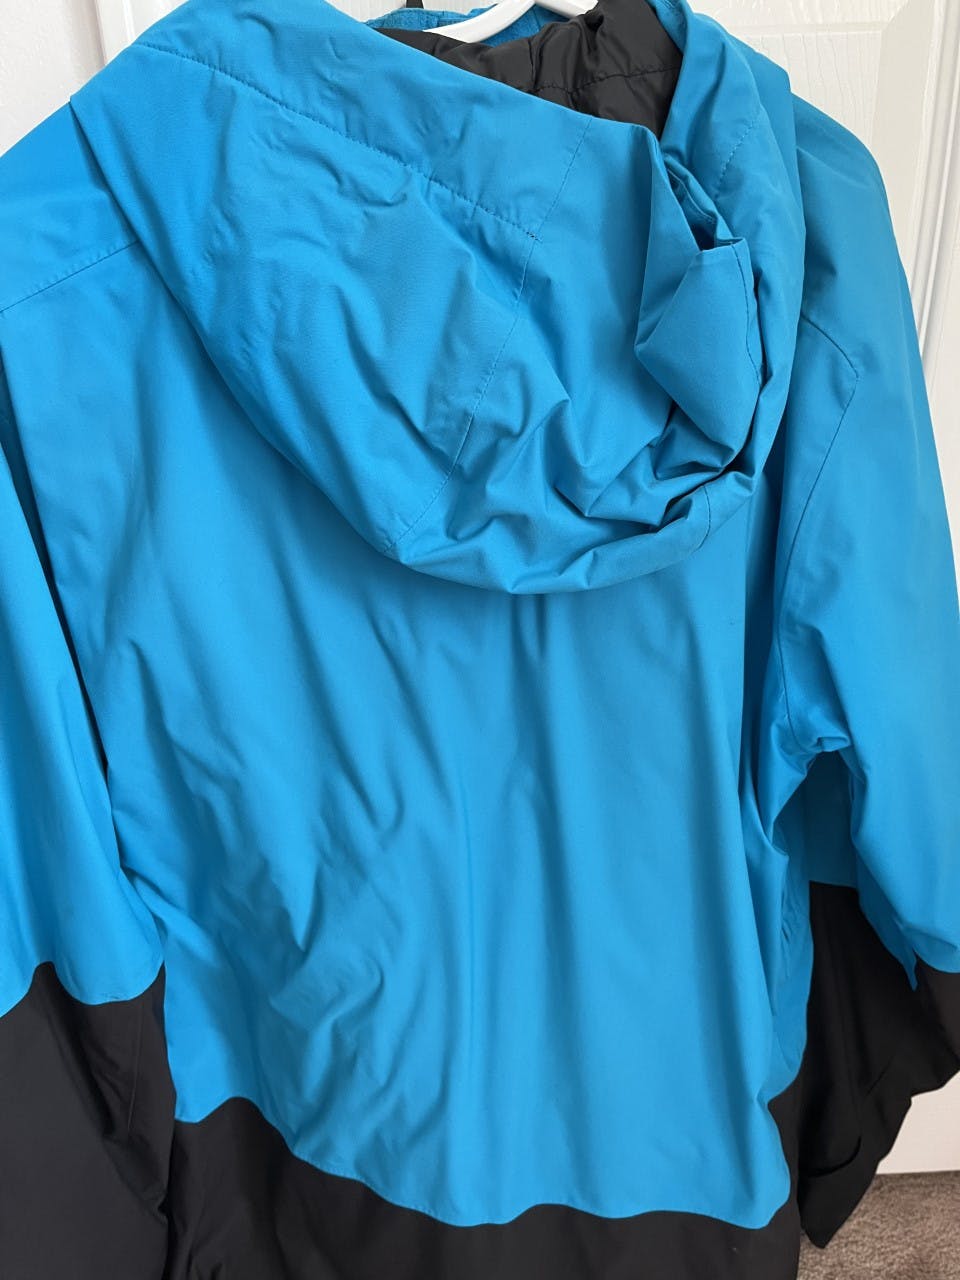 Back view of the North Face Sickline Insulated Jacket.